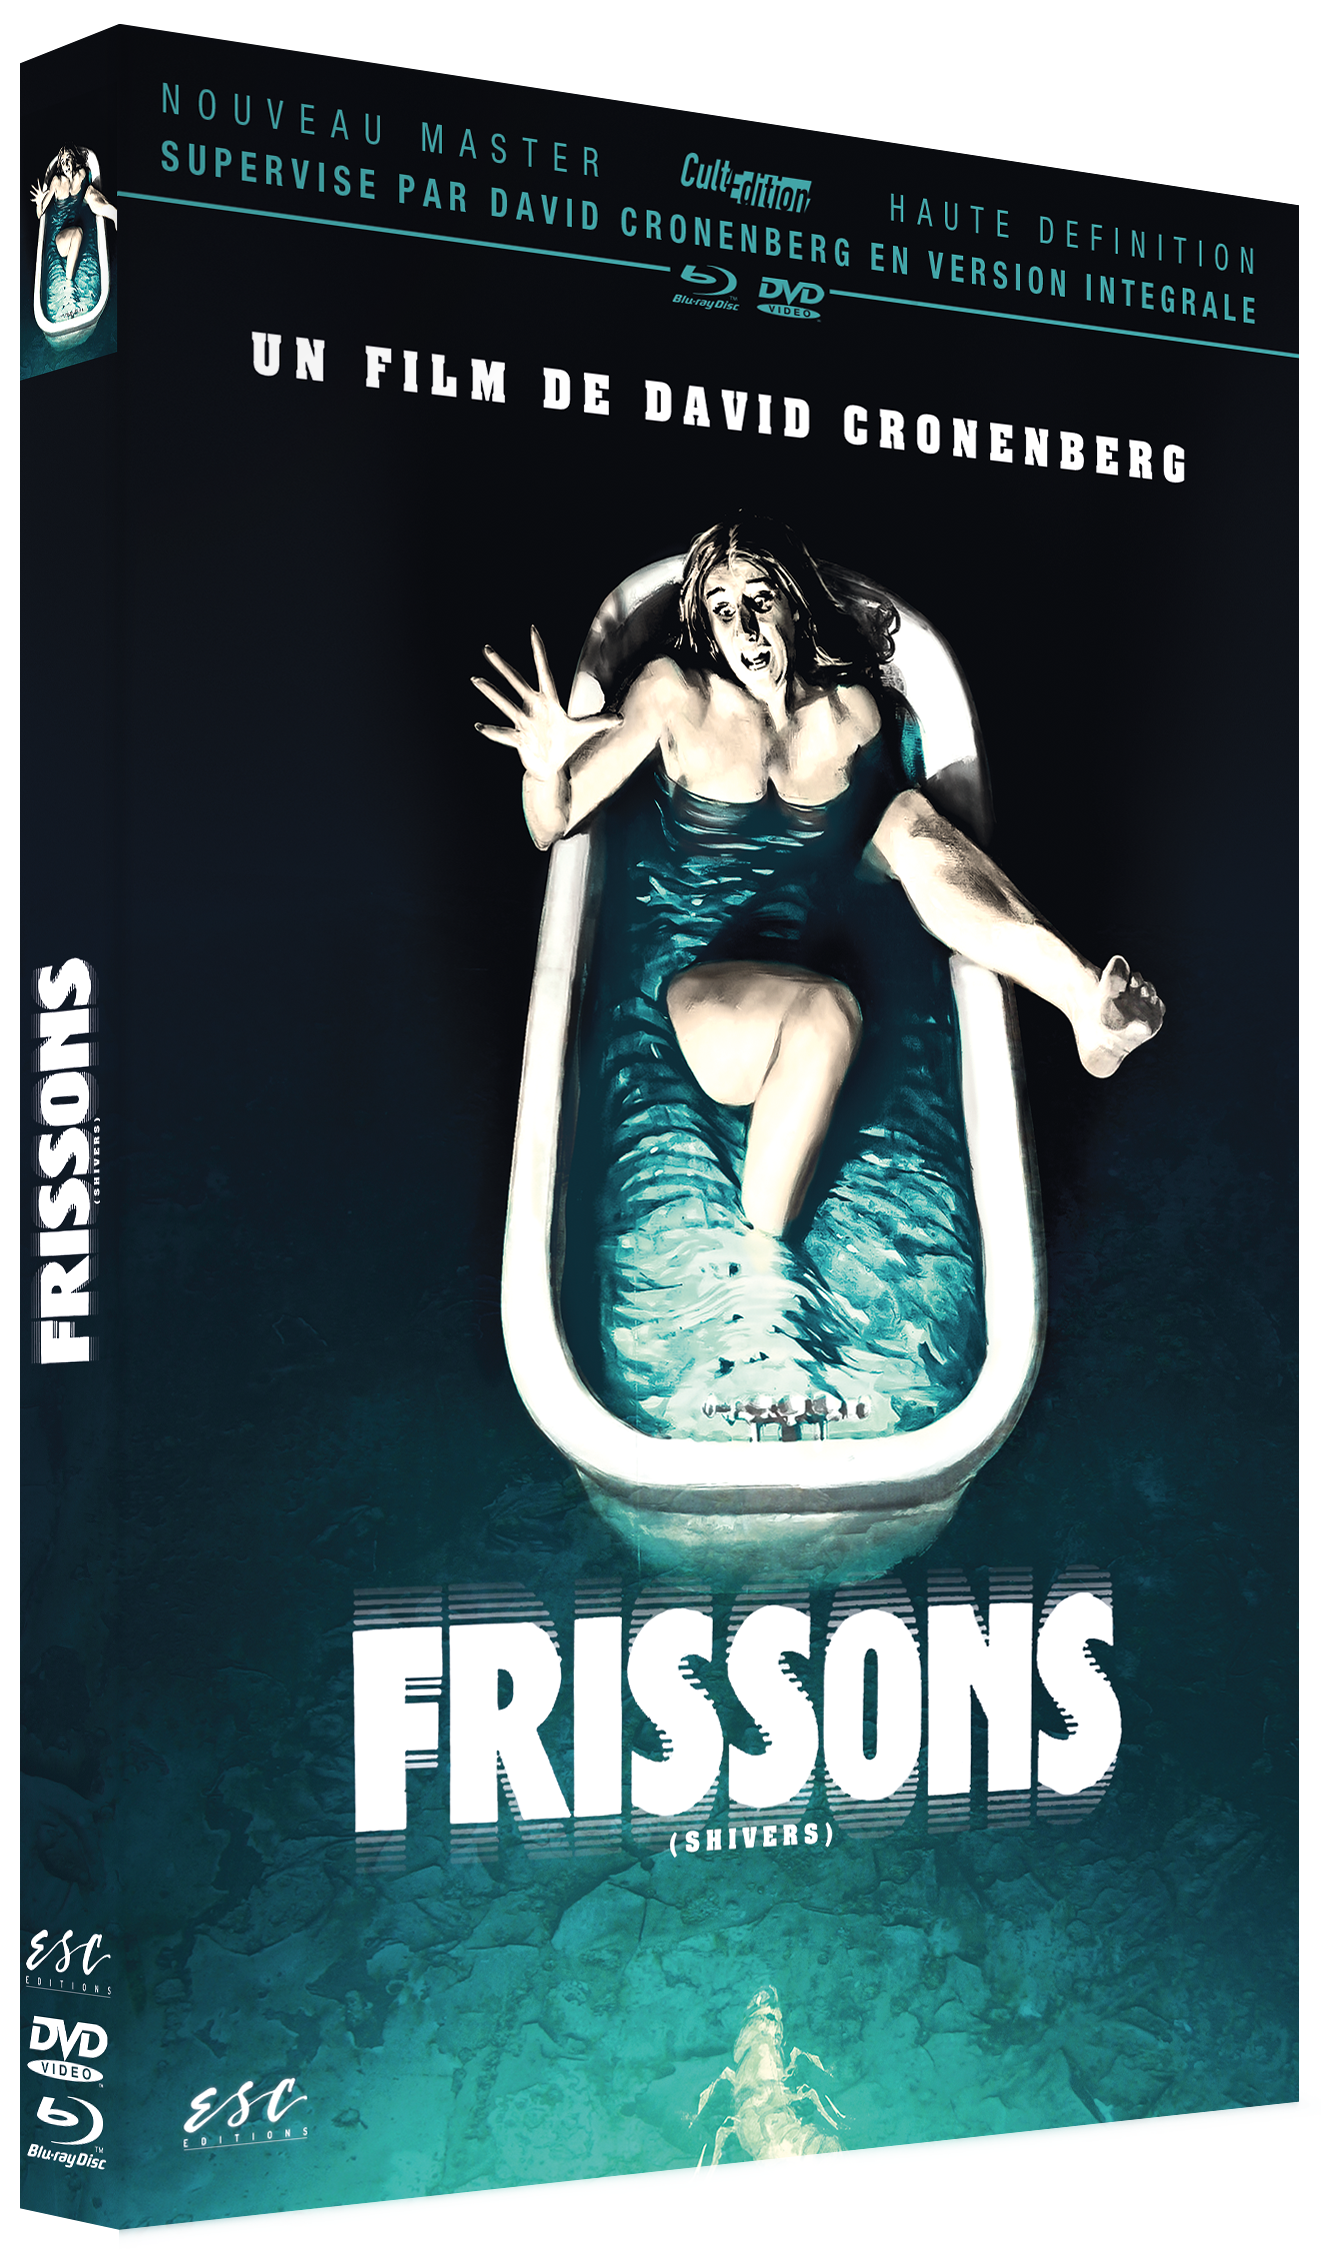 FRISSONS (SHIVERS)-